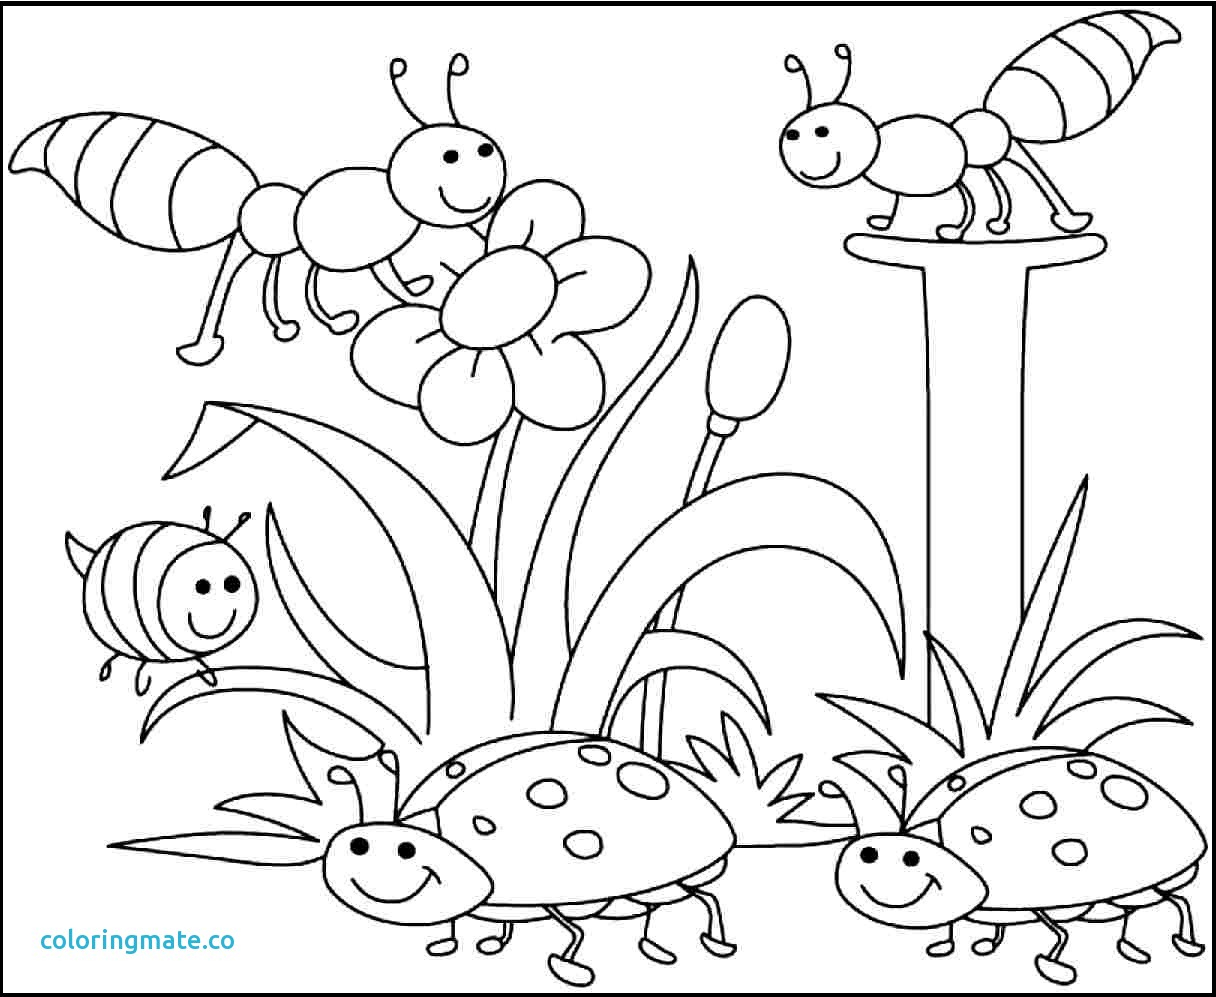 Spring Coloring Pages Coloring Sheets Stunning Ideas Free Downloadable Coloring Pages